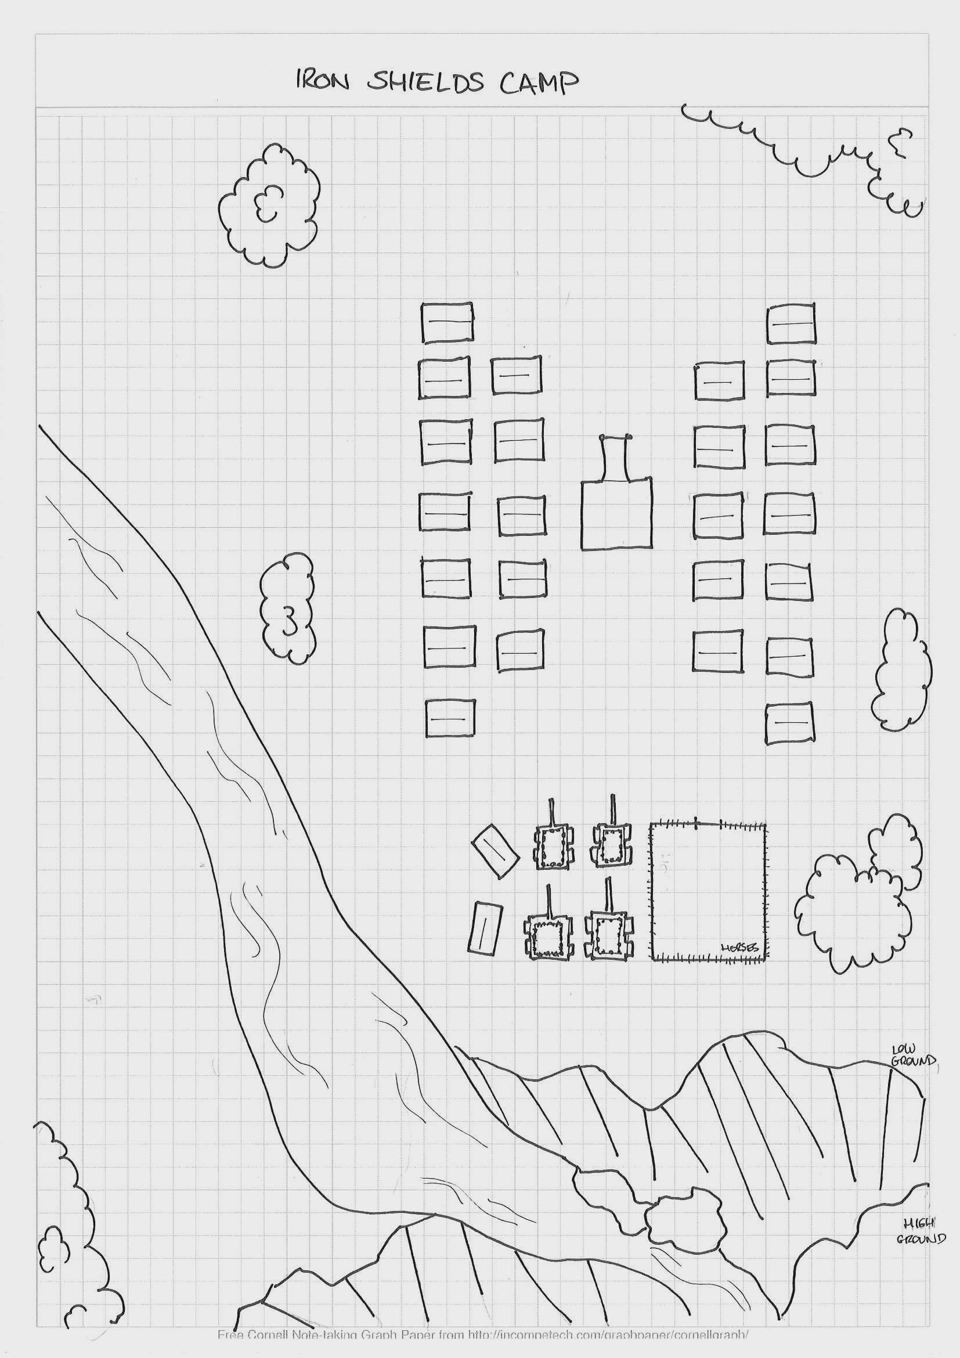 dnd-map-military-camp.webp